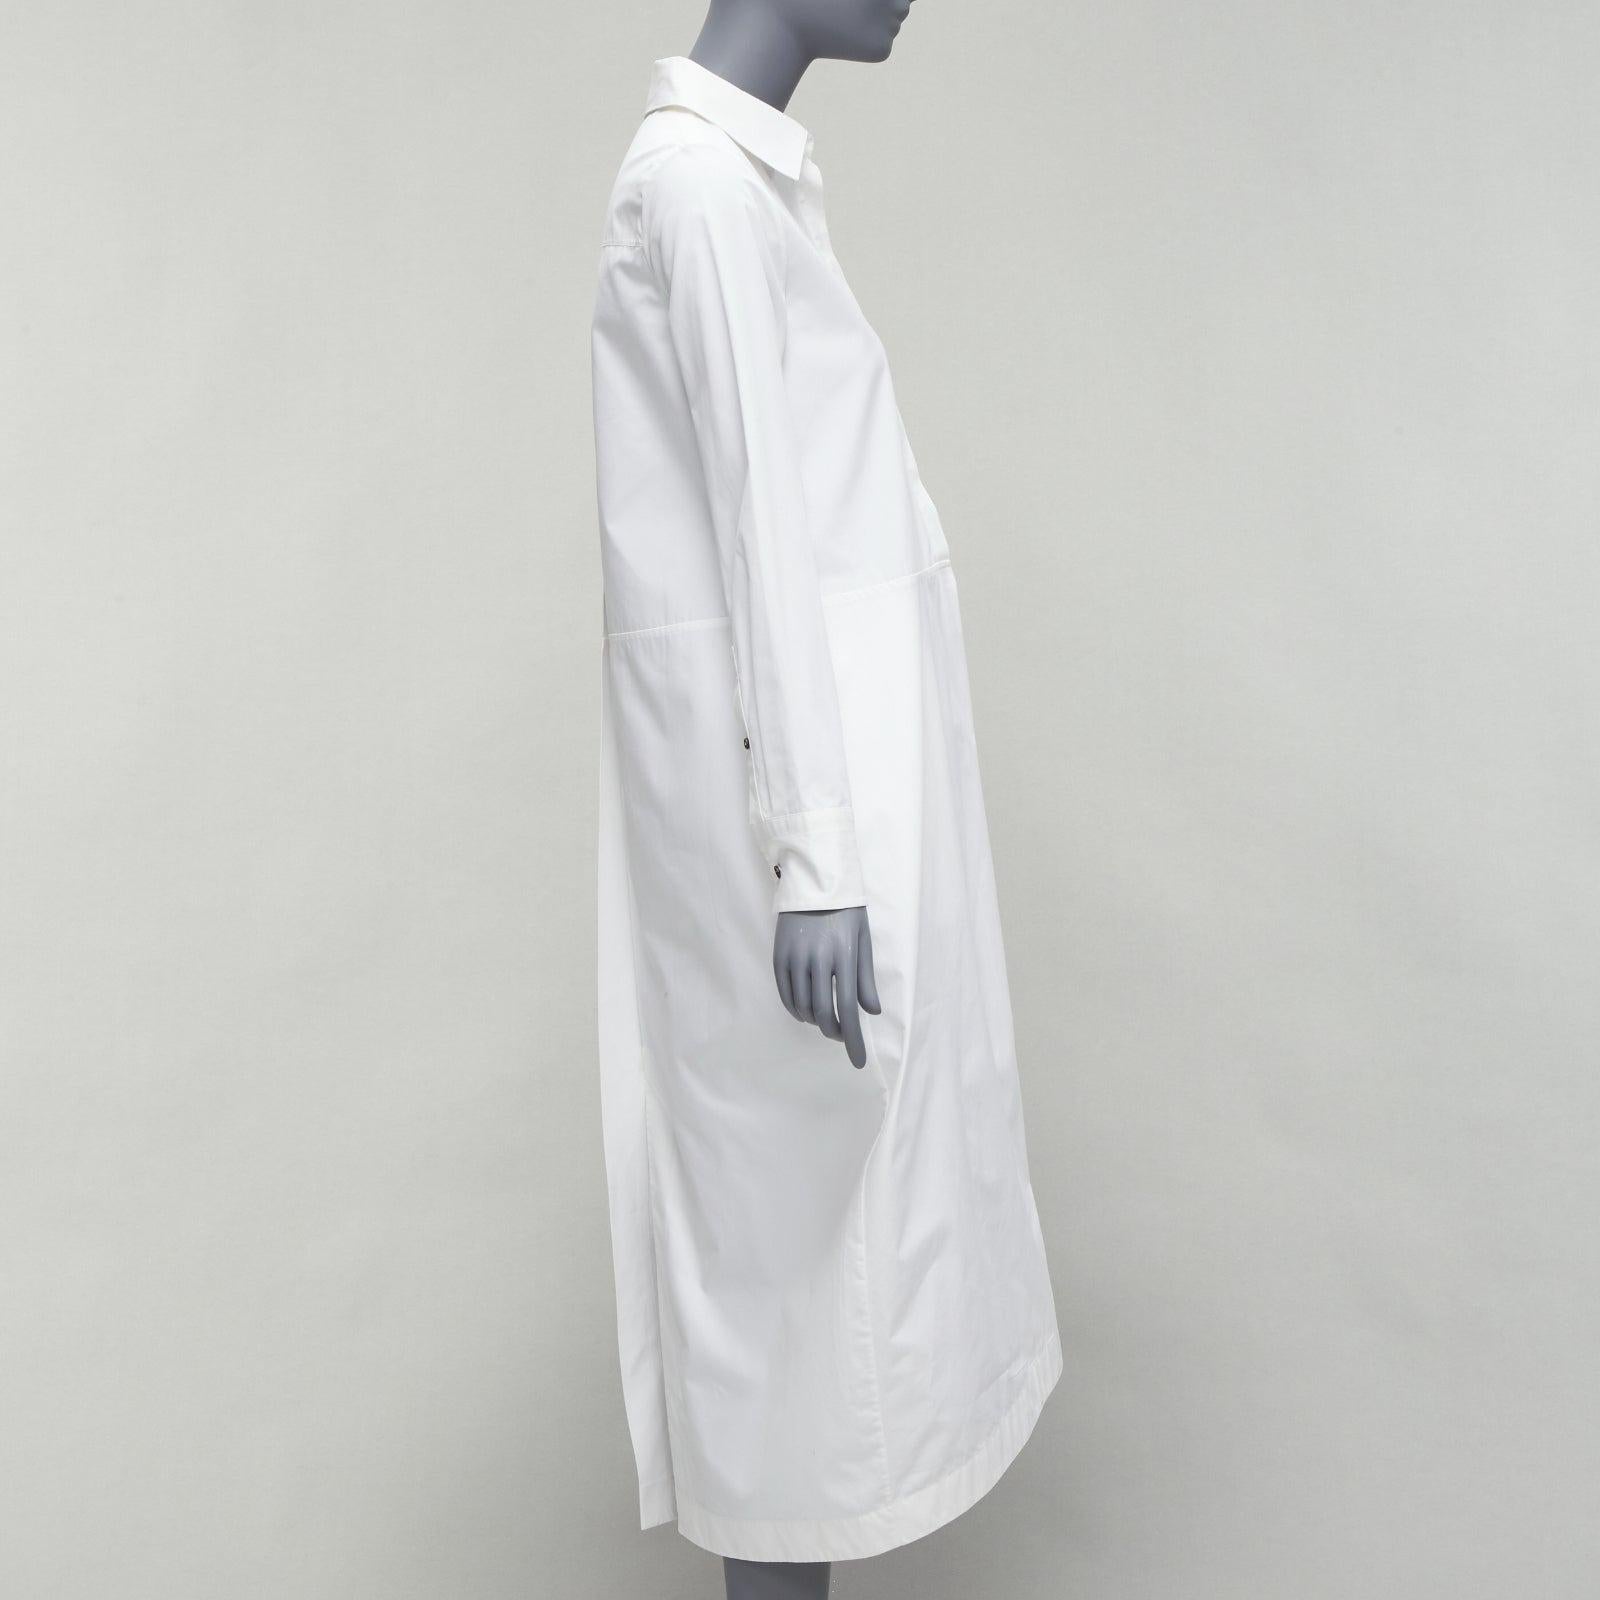 new JIL SANDER 2022 white hidden placket minimal boxy shirt dress FR30 XXS
Reference: SNKO/A00273
Brand: Jil Sander
Collection: 2022
Material: Cotton
Color: White
Pattern: Solid
Closure: Button
Extra Details: Back pleat and back single vent at